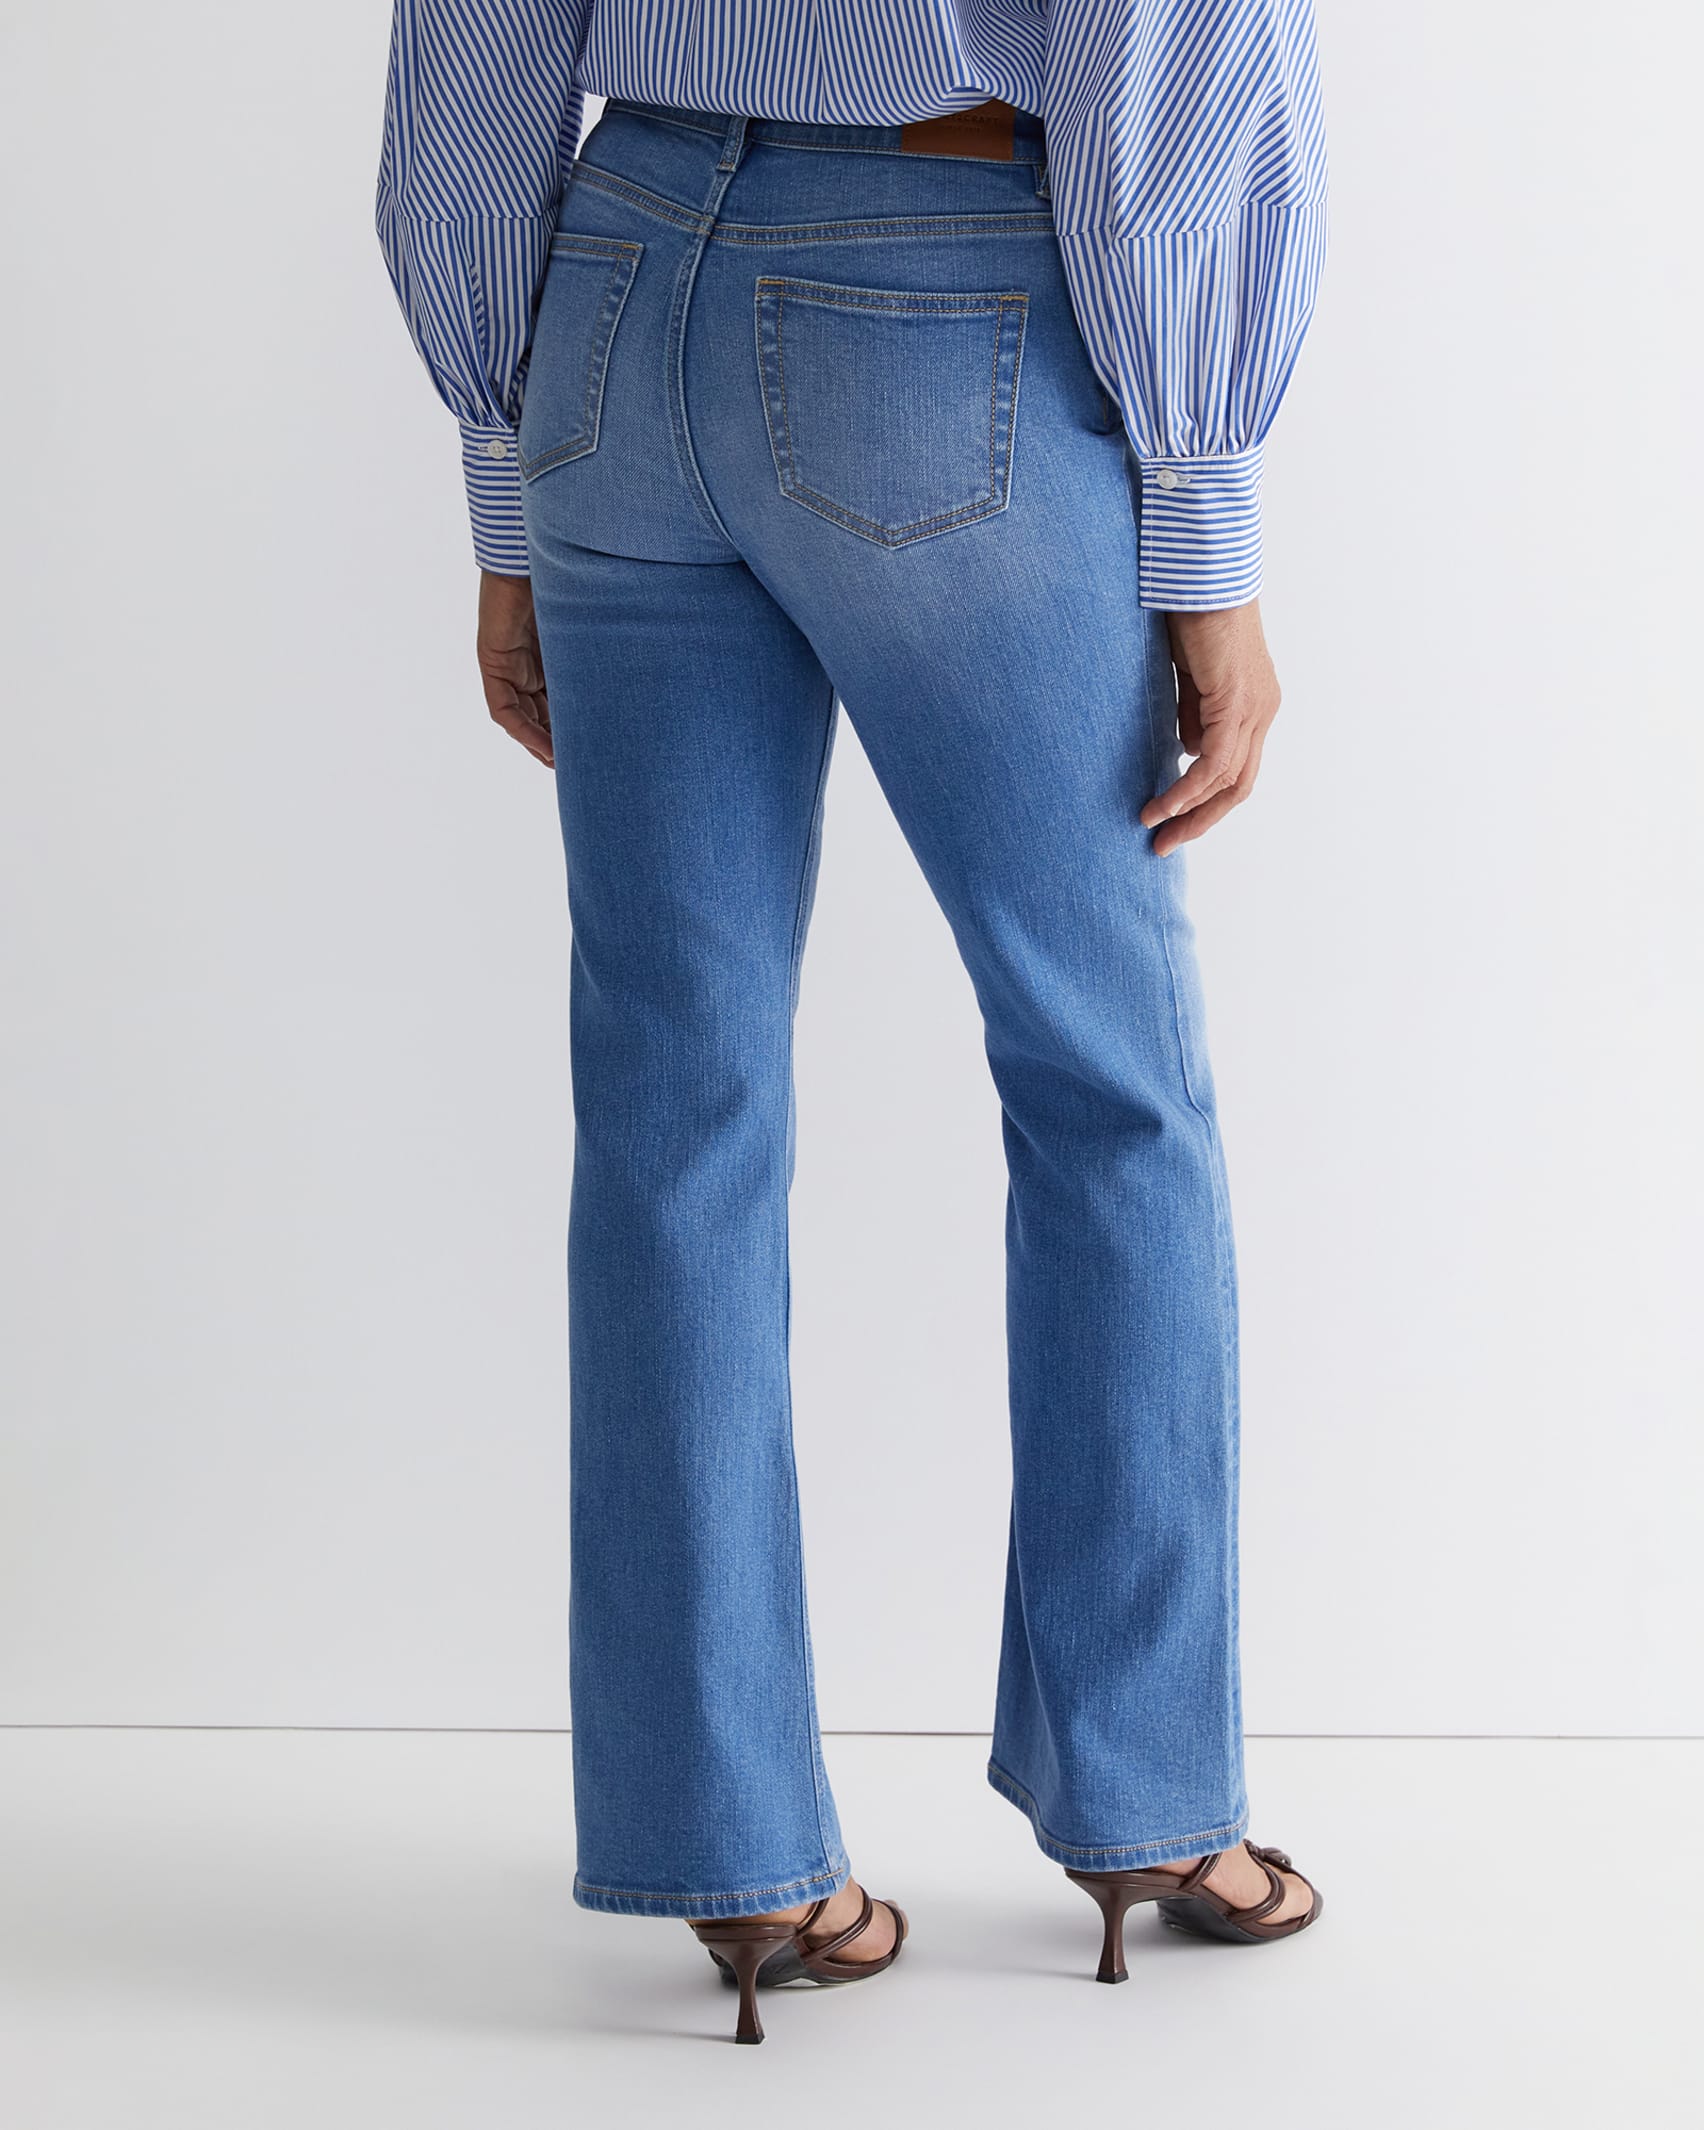 Holly Bootleg Jean in SOFT BLUE